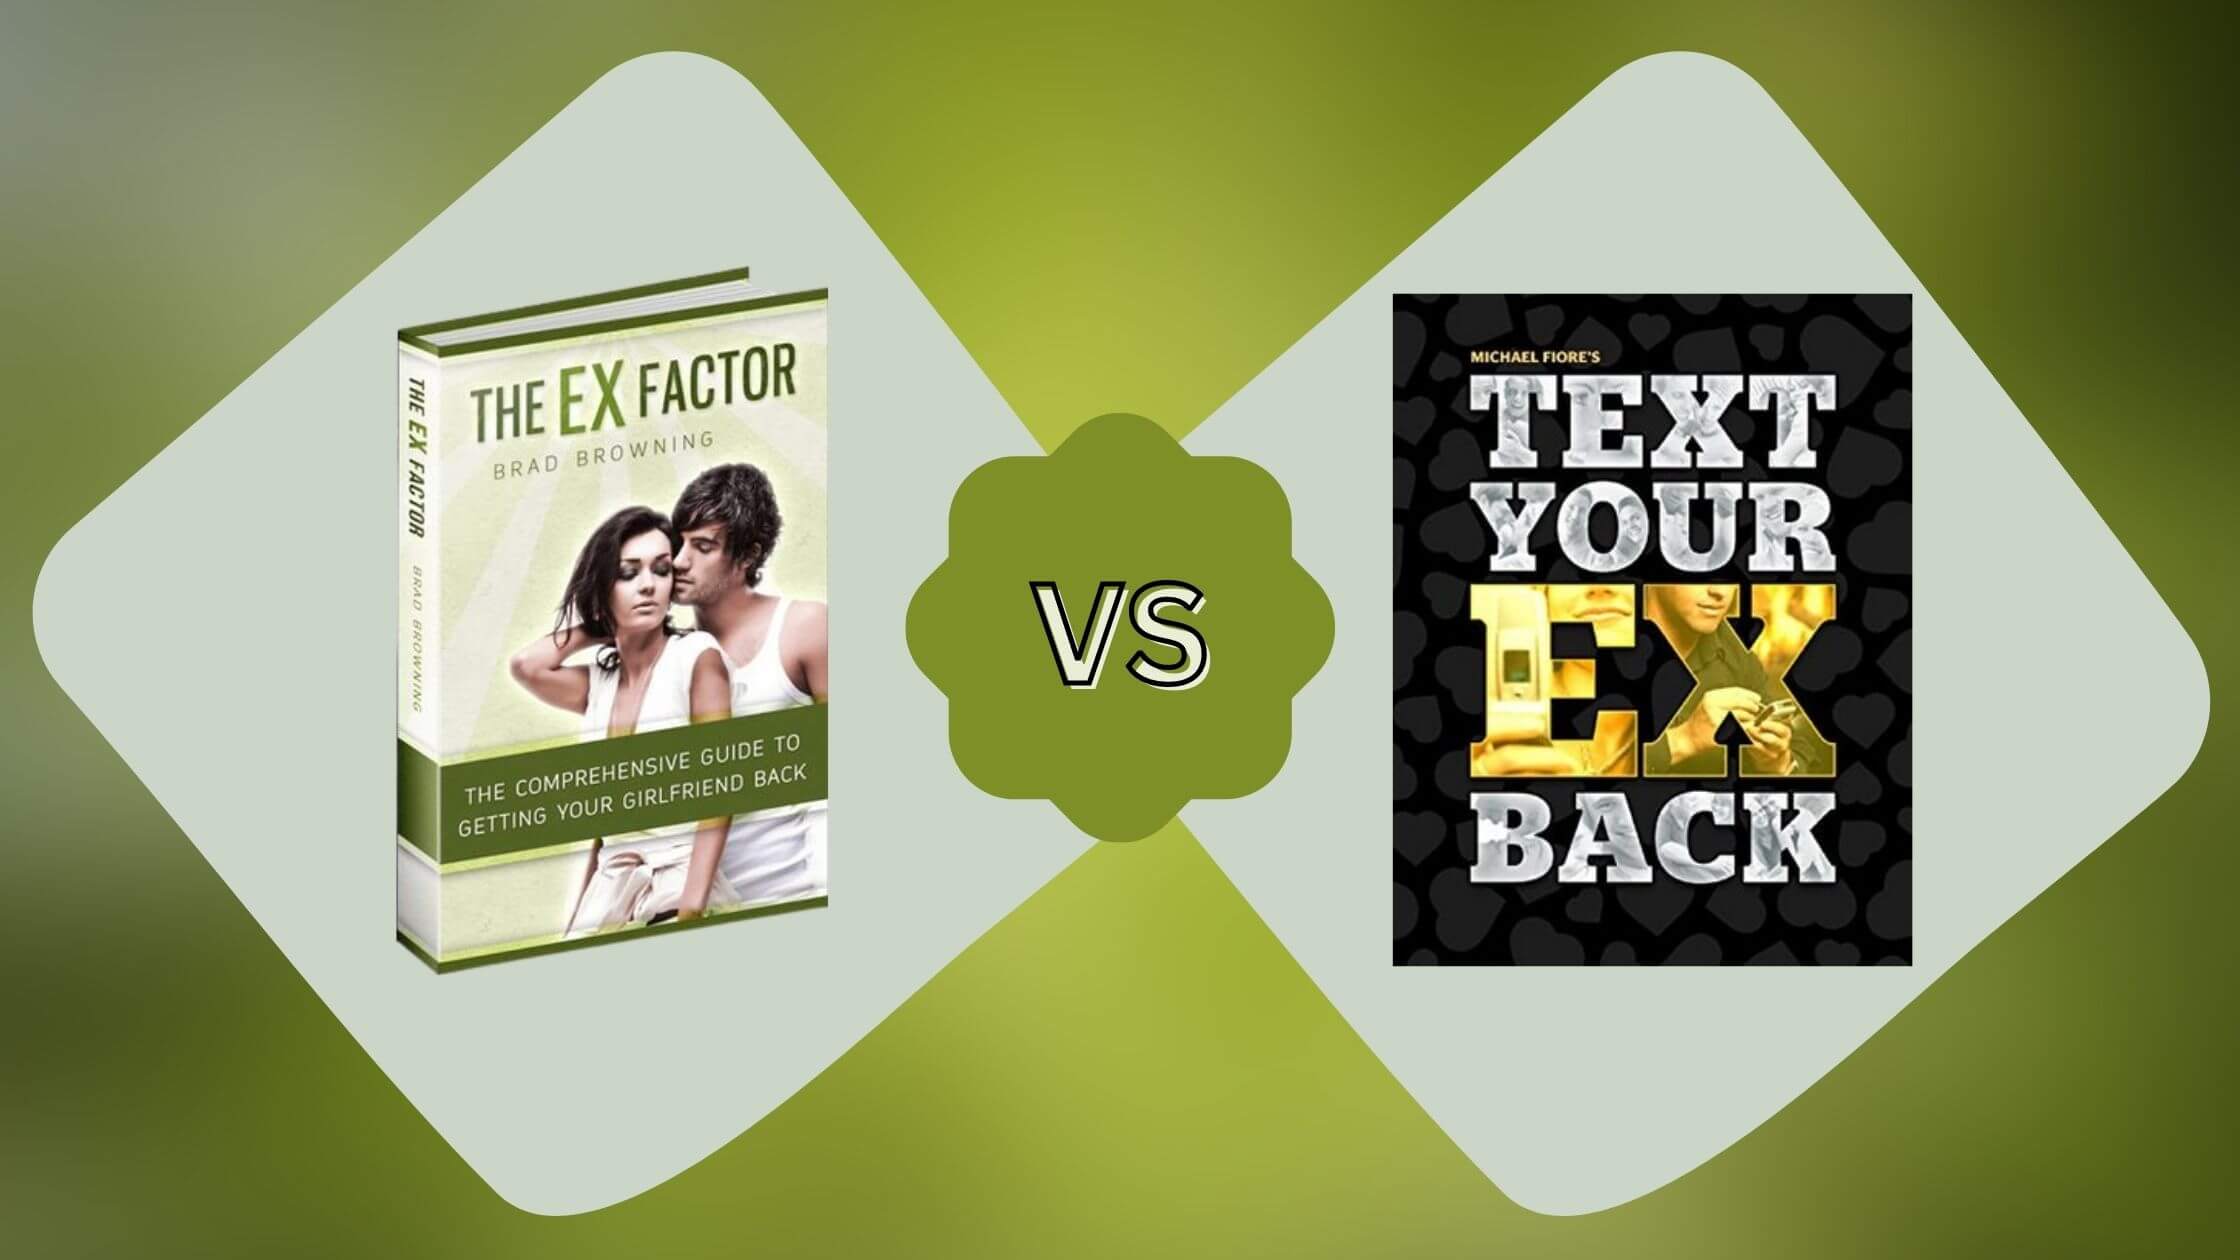 The Ex Factor Guide Versus Text Your Ex Back